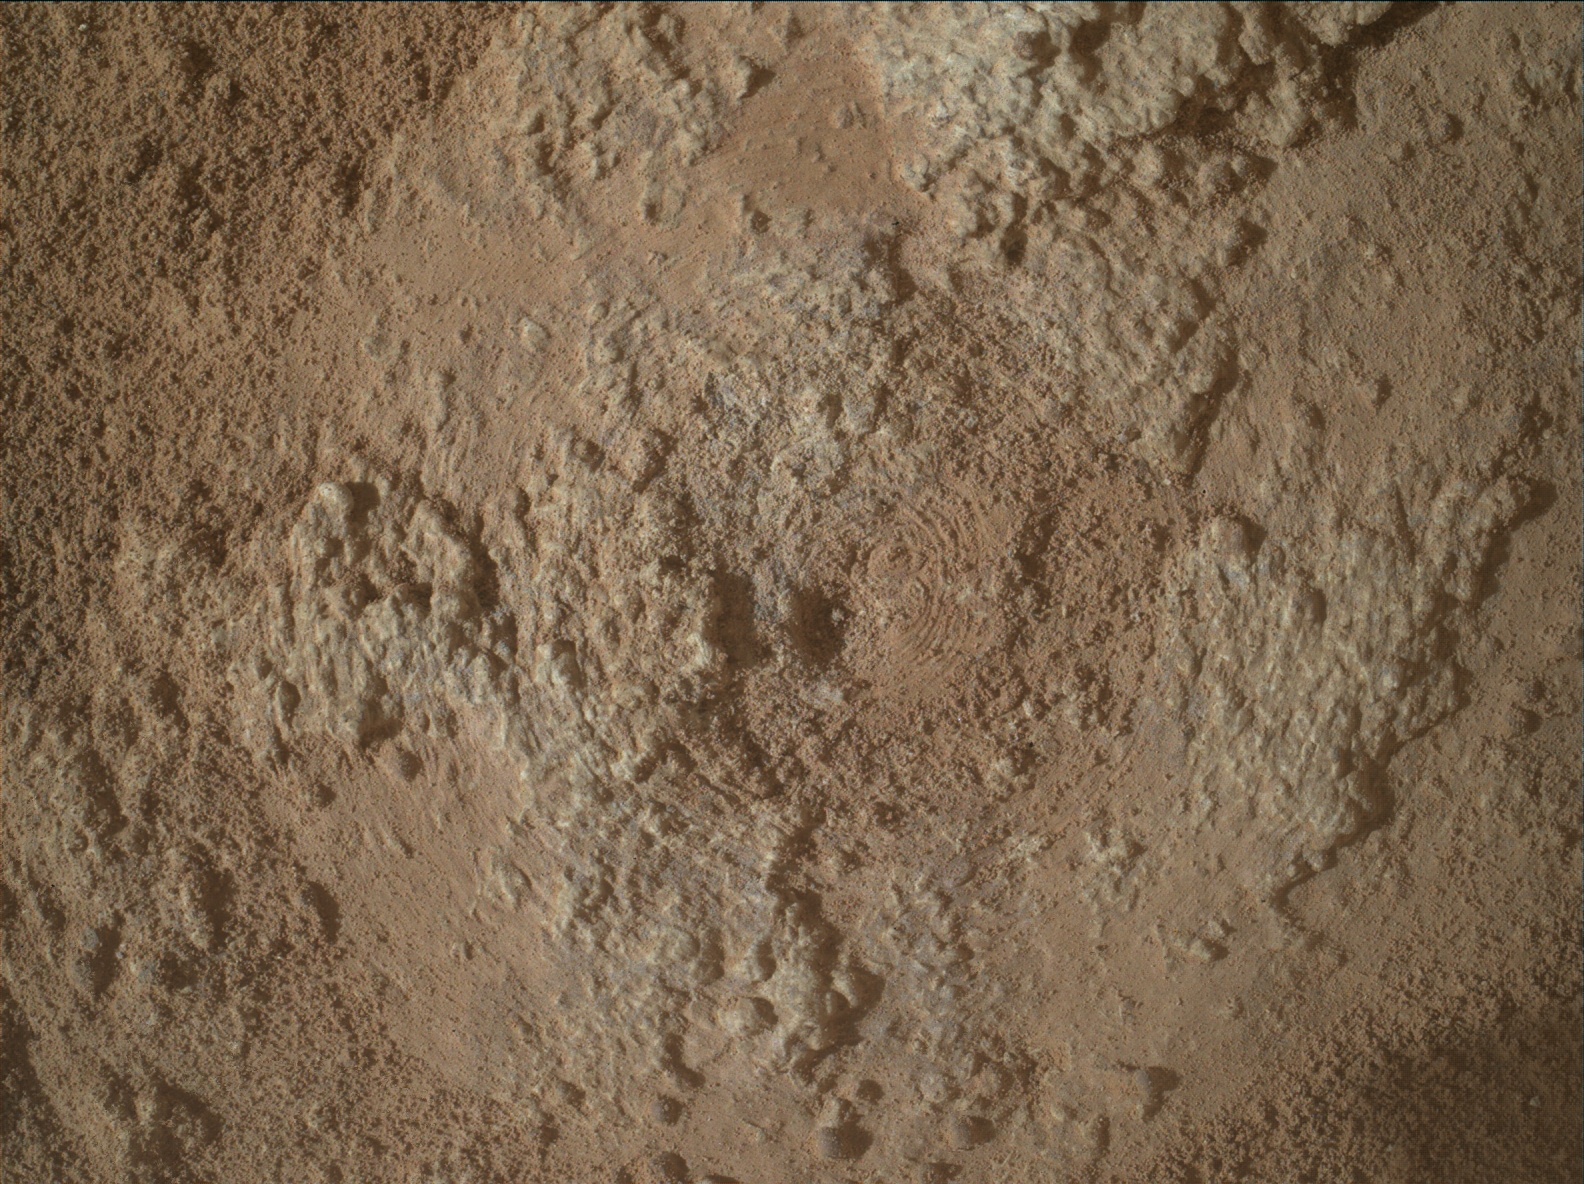 Nasa's Mars rover Curiosity acquired this image using its Mars Hand Lens Imager (MAHLI) on Sol 3706